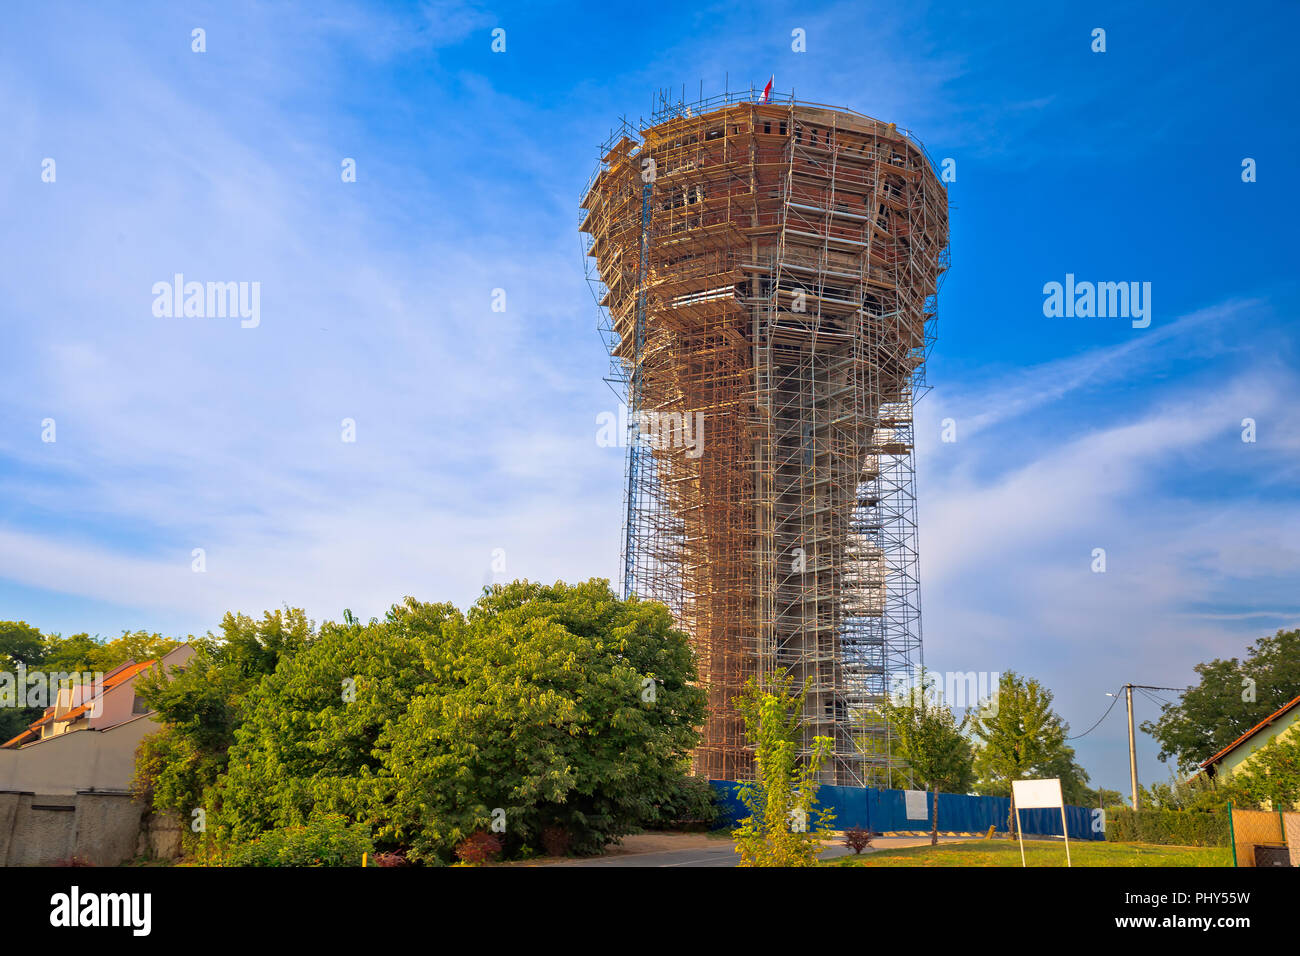 Vukovar water tower under reconstruction, symbol of war was hit with over 600 missiles but didn't fall, Slavonija region of Croatia Stock Photo